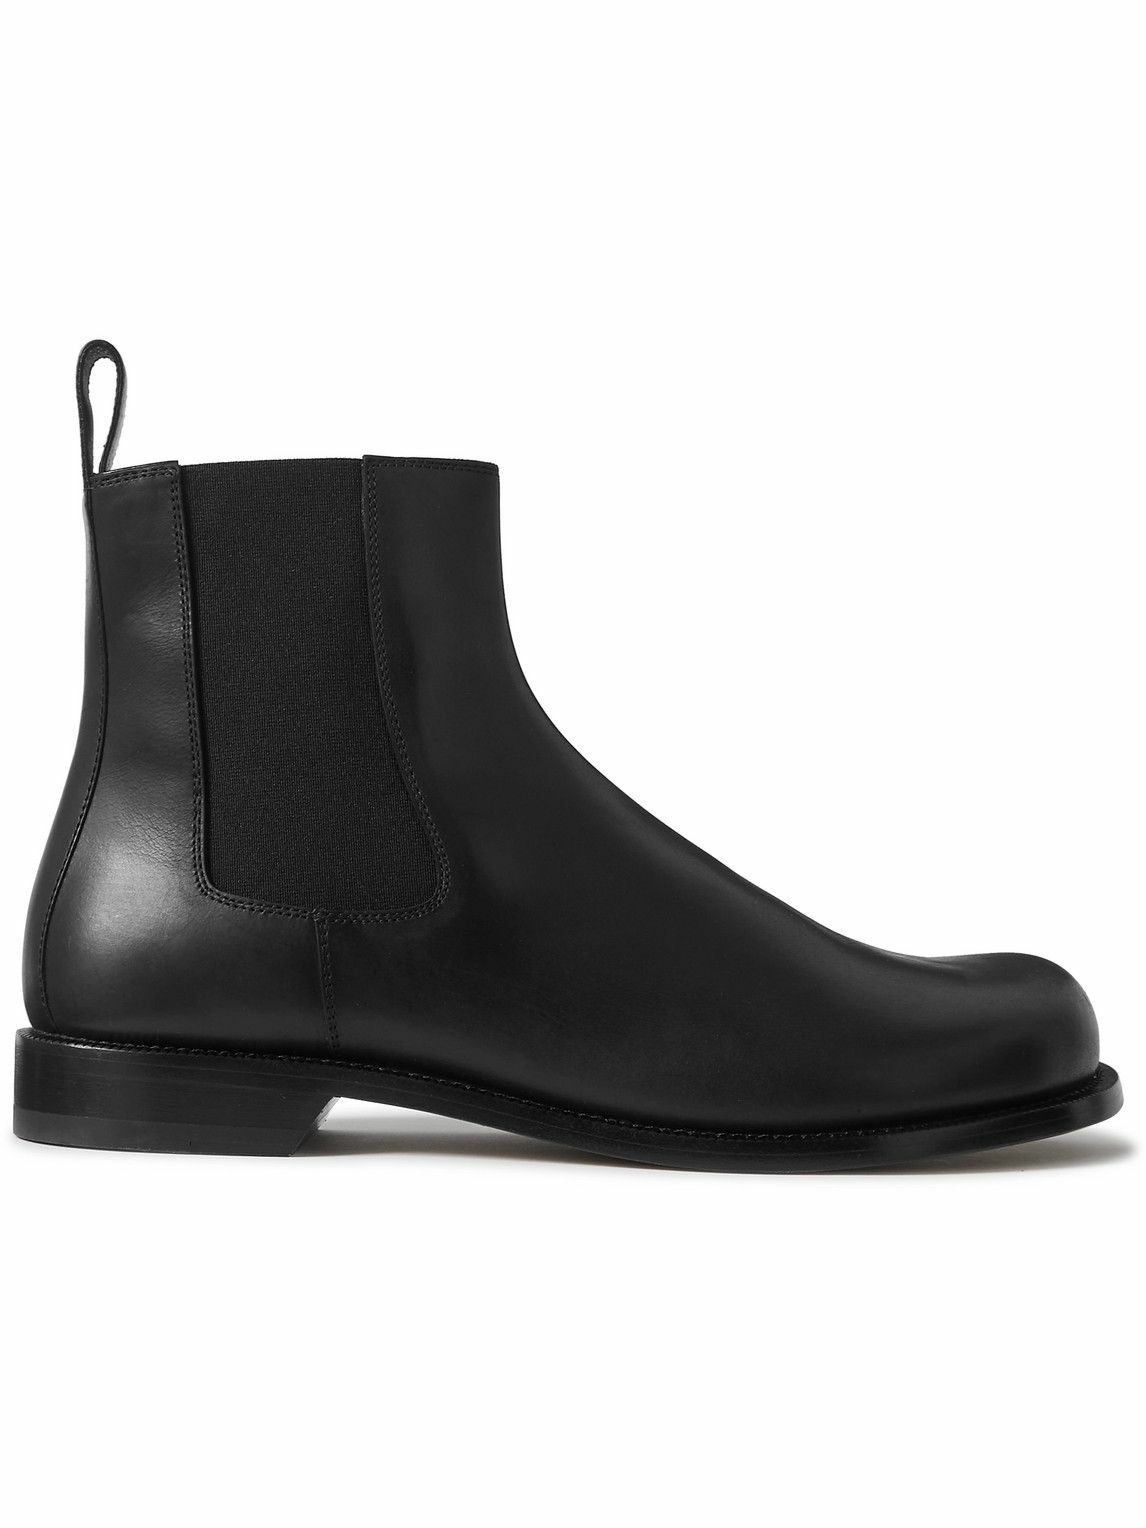 Photo: LOEWE - Campo Leather Chelsea Boots - Black